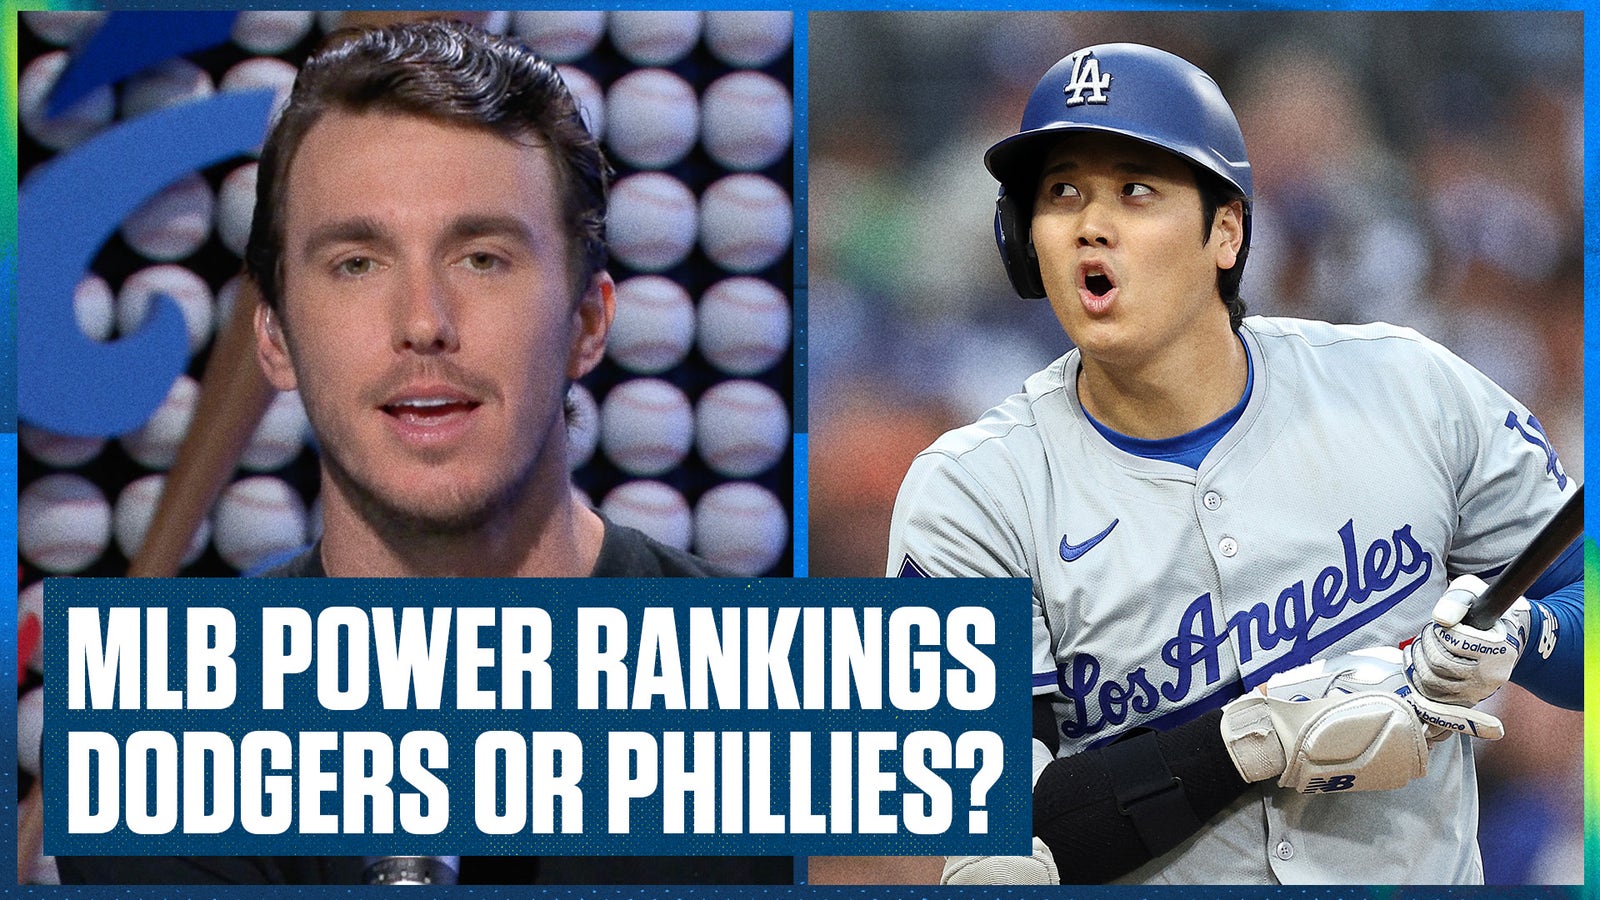 MLB Power Rankings: Phillies or Dodgers for the No.1 spot?